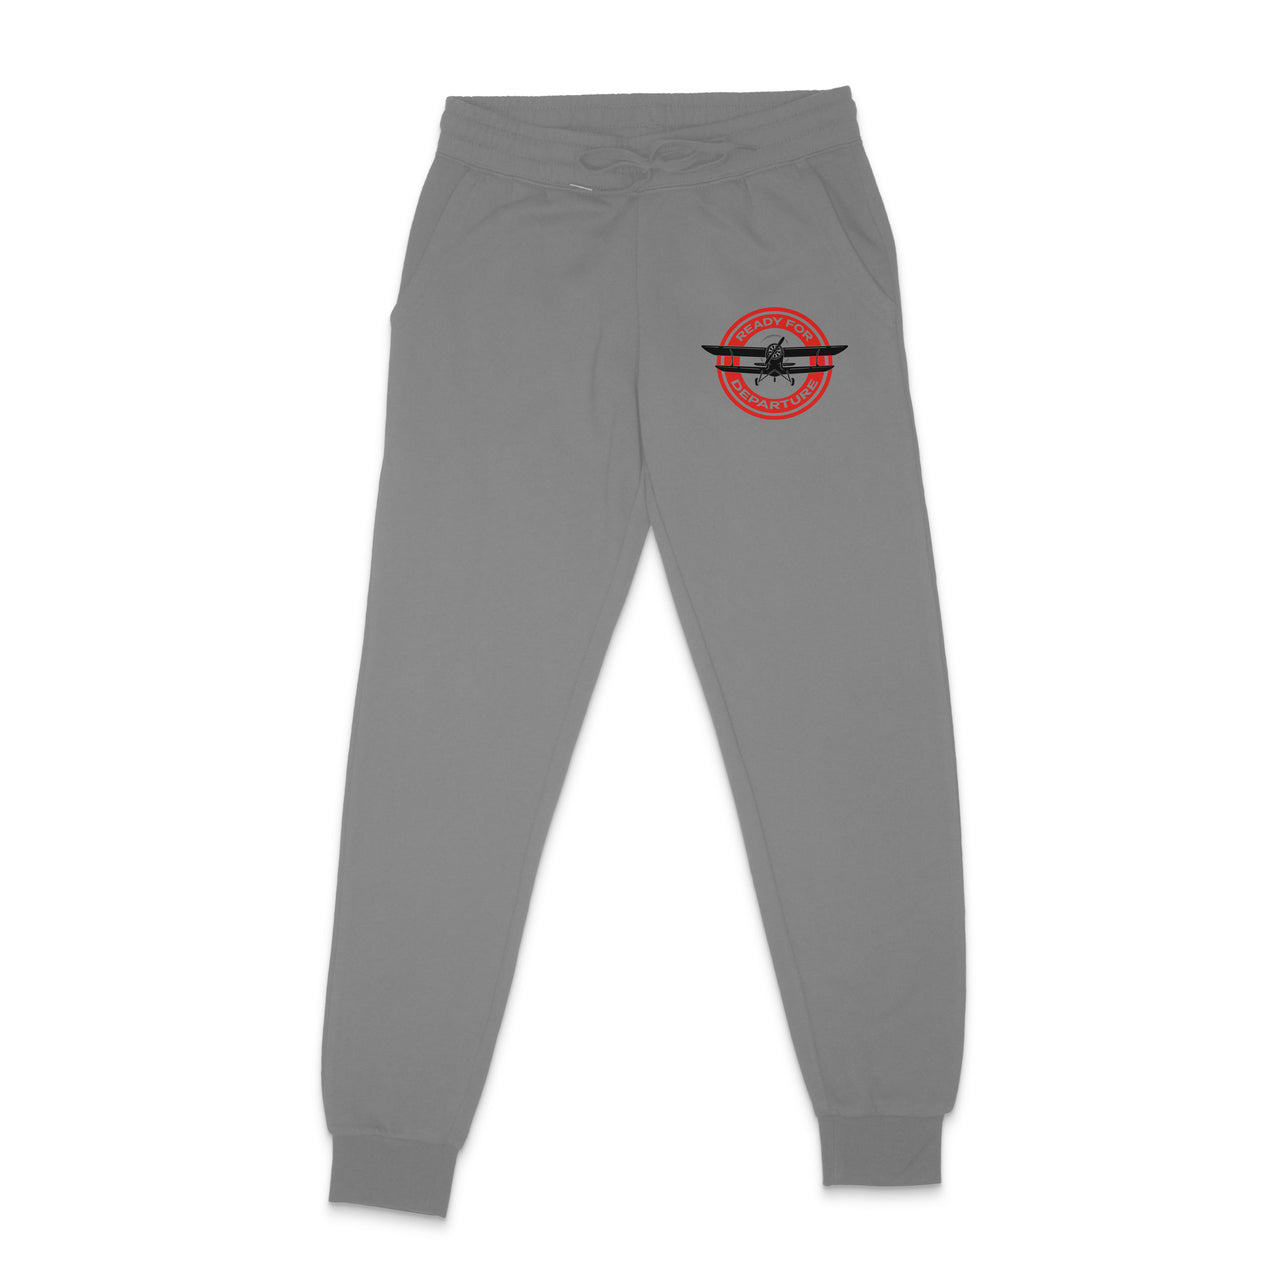 Ready for Departure Designed Sweatpants